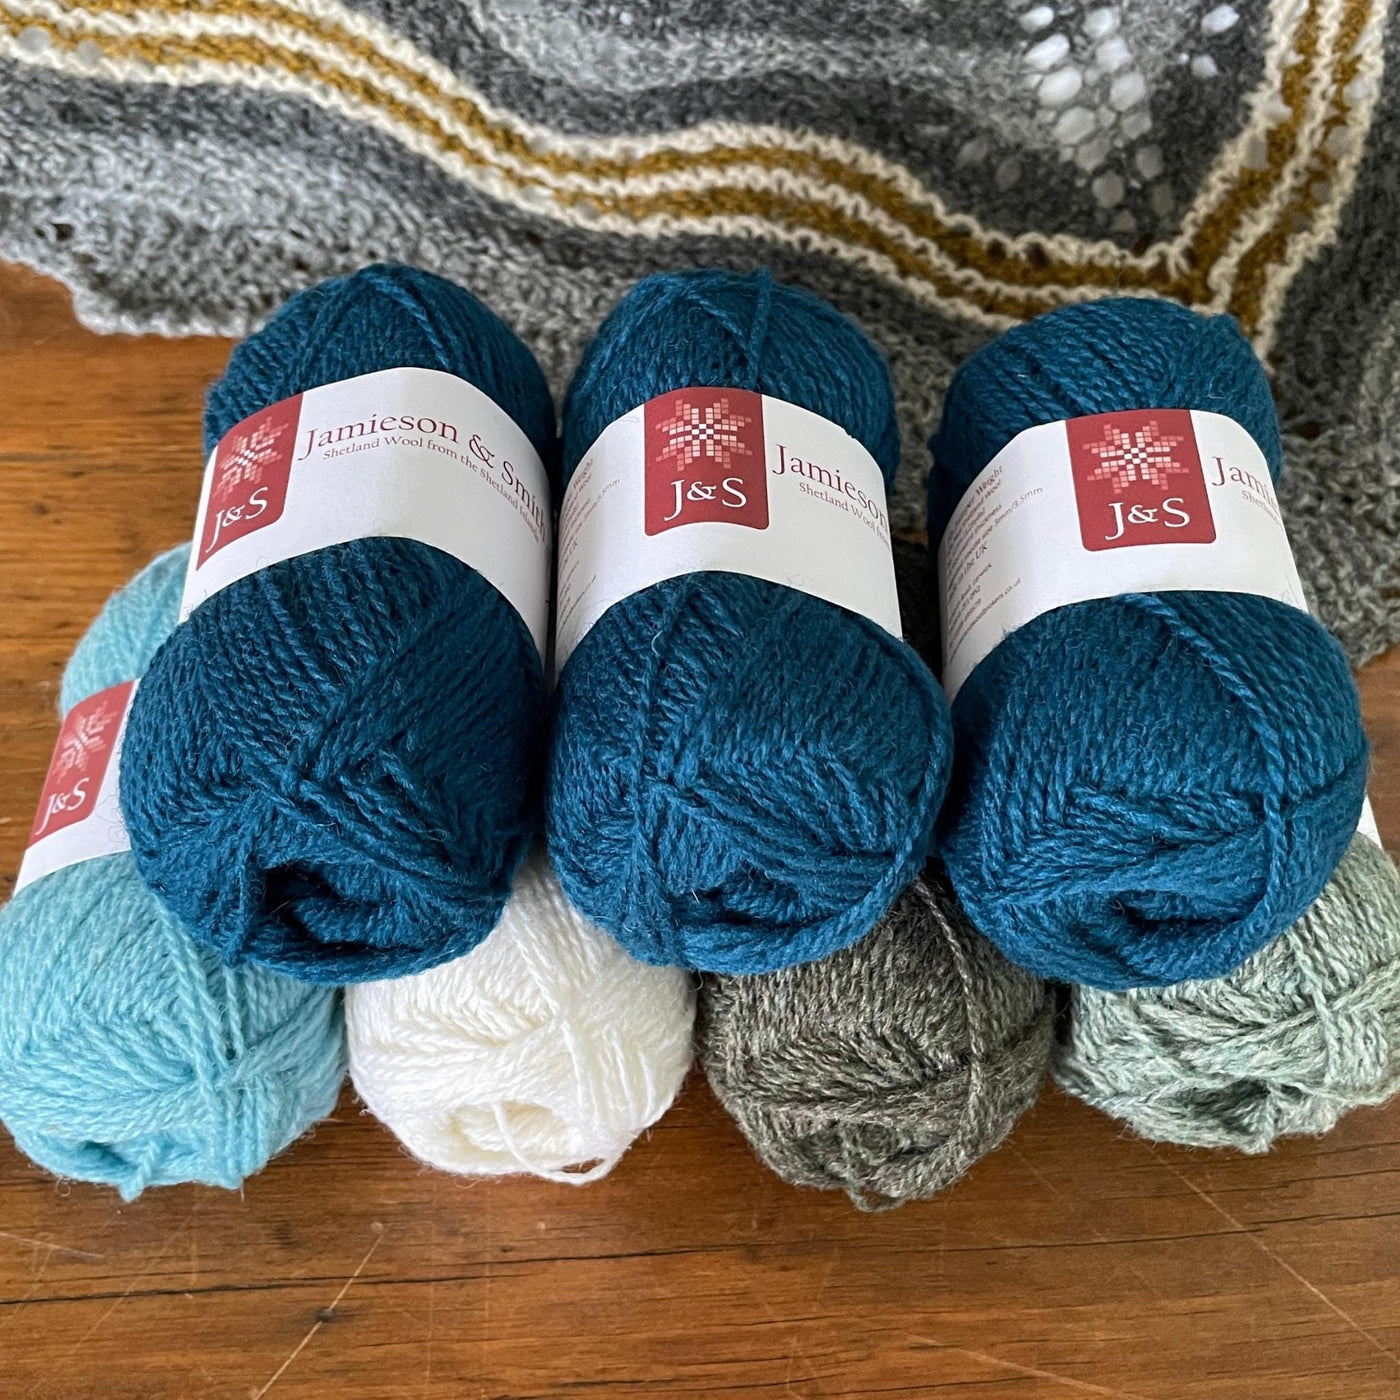 7 balls of J&S yarn in blue tones, grey and white.  knitted hap in background.